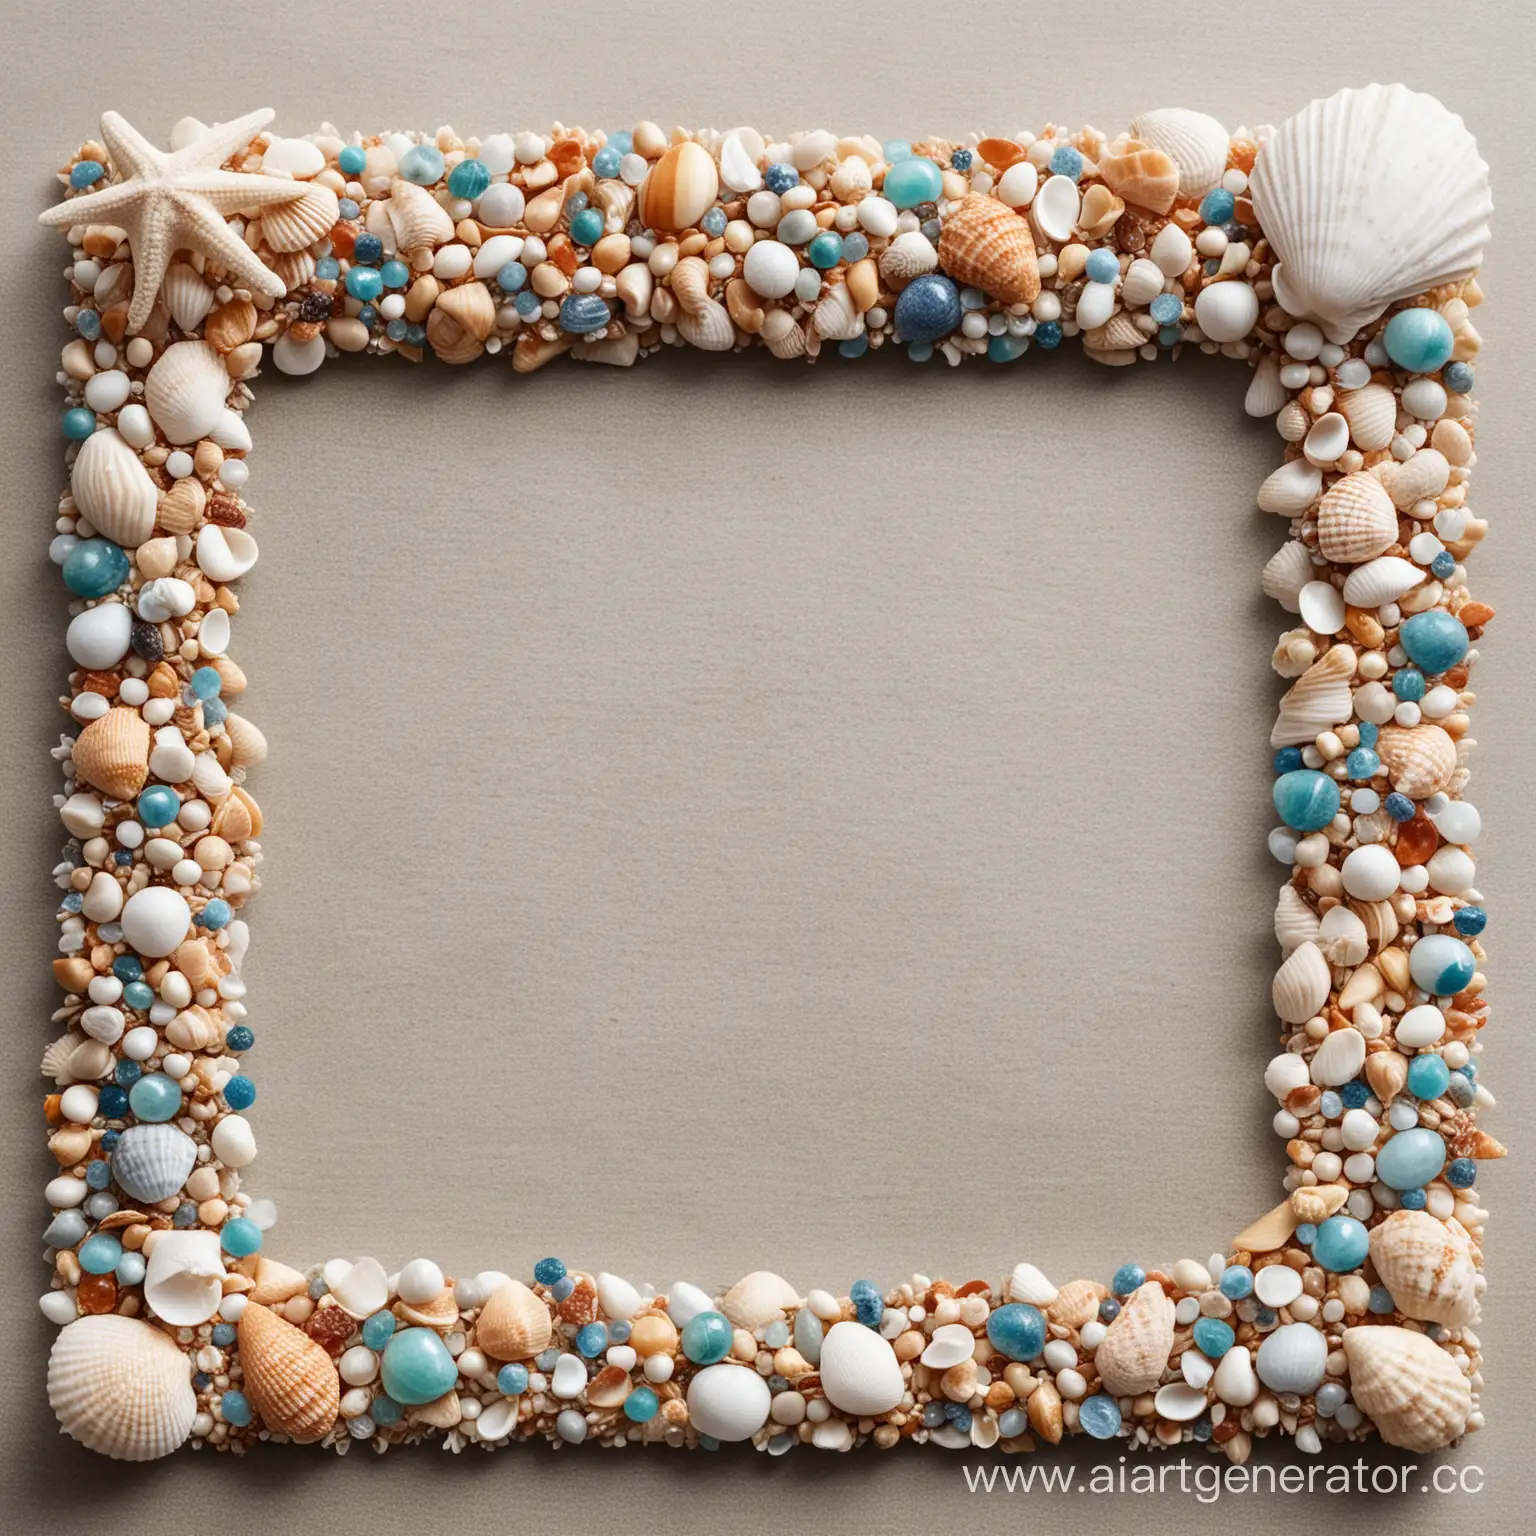 Oceanic-Frame-Decorated-with-Gems-and-Shells